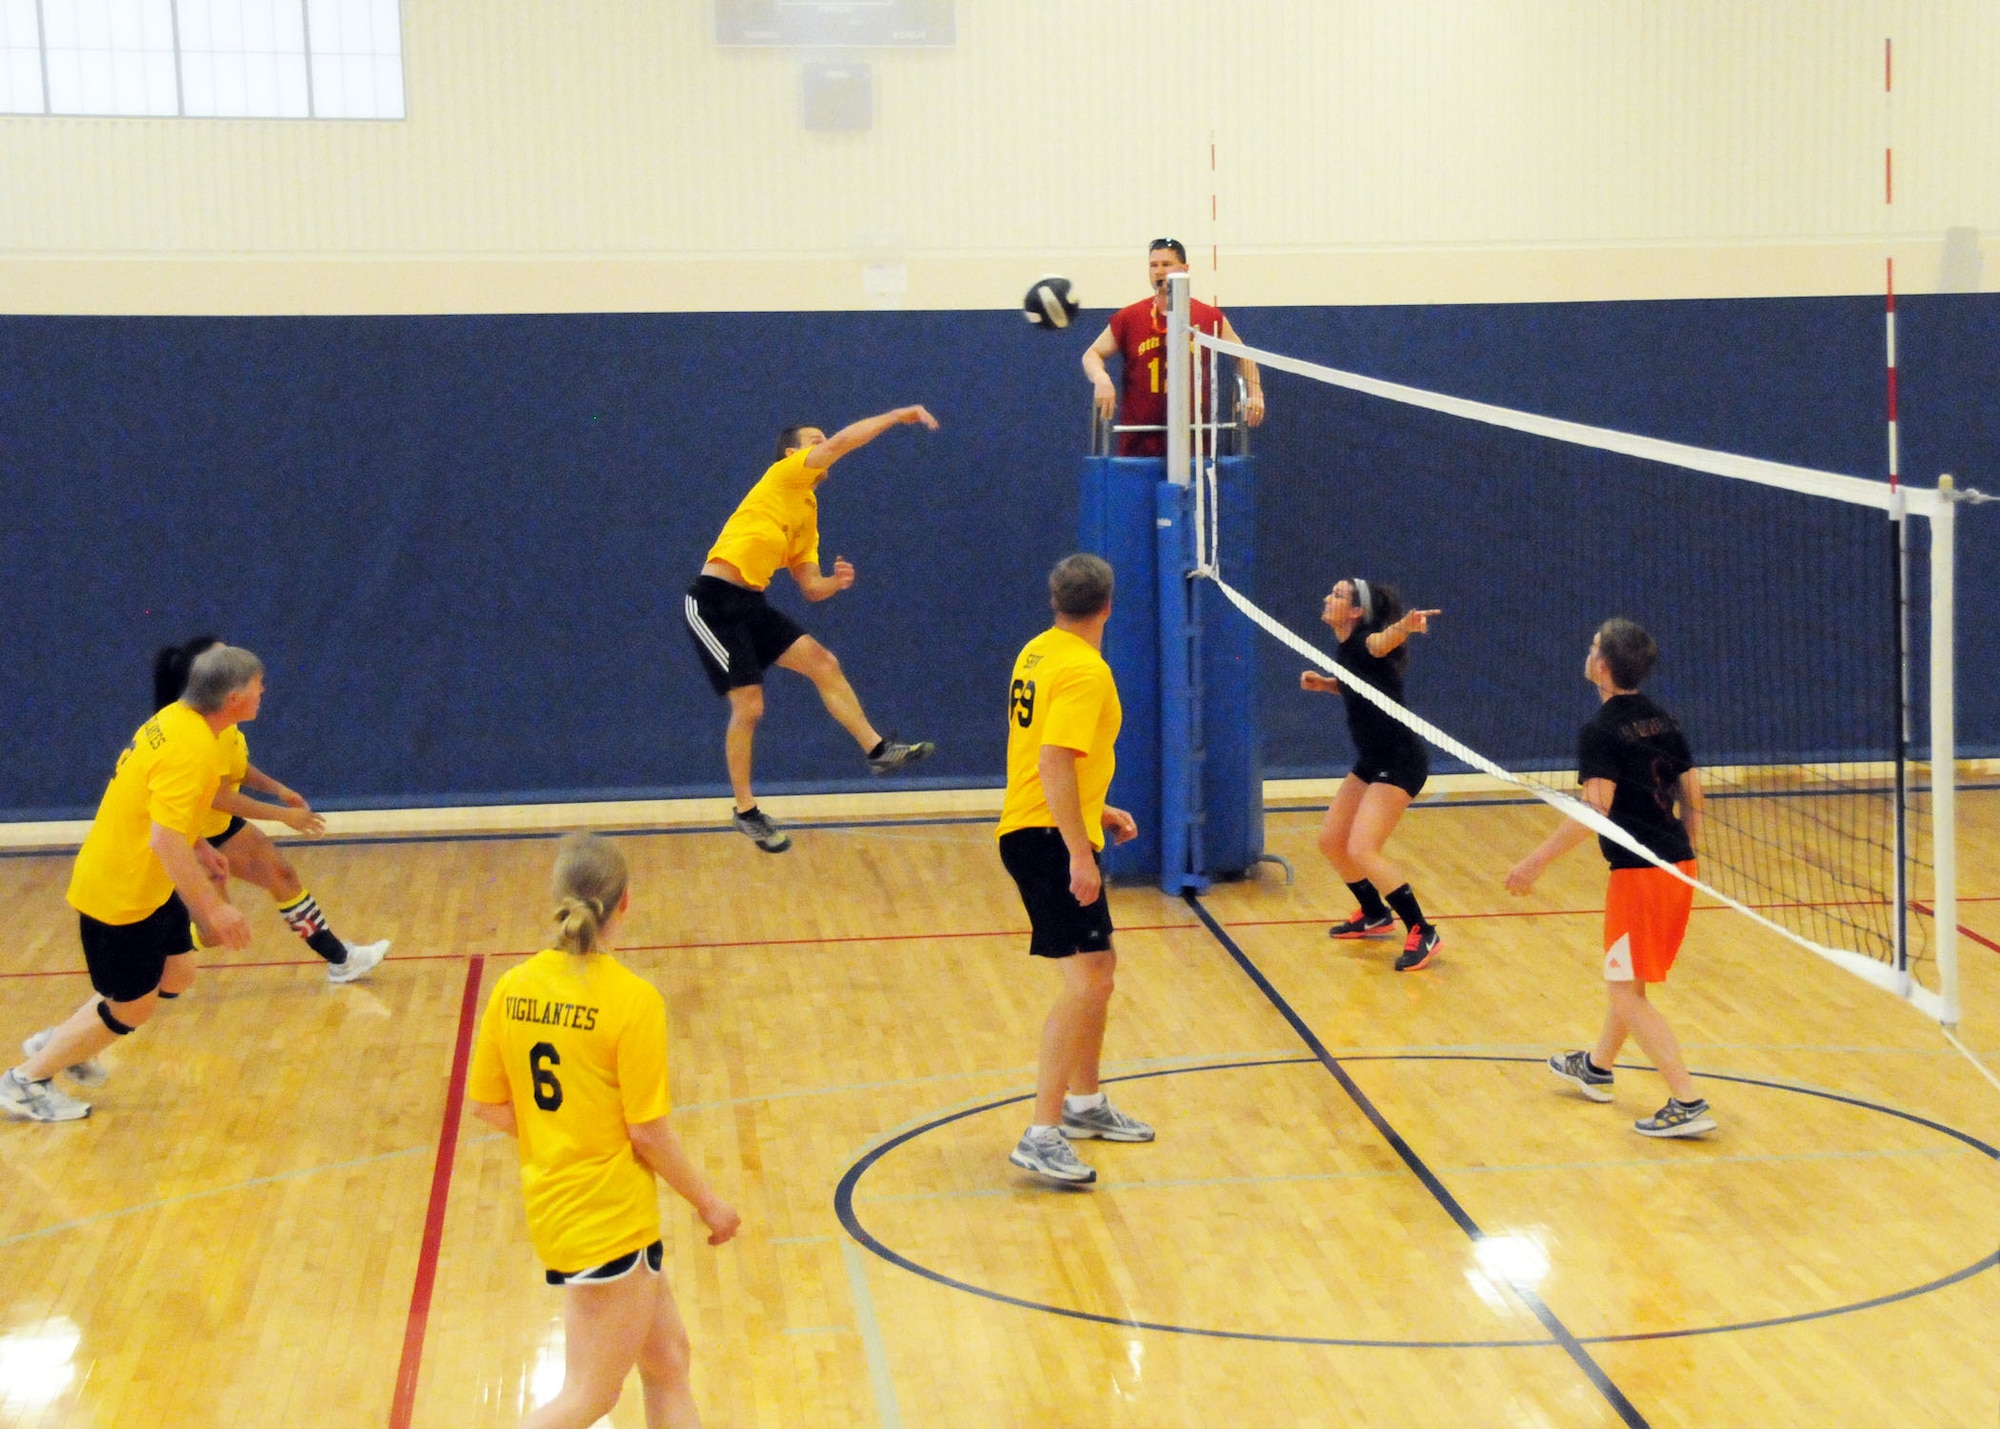 Tech. Sgt. Mark Bruggeman spikes a ball to the opposing team in the final Montana Air National Guard Vigilantes volleyball game played during season playoffs held at the Malmstrom Fitness Center on May 14, 2013. (U.S. Air Force photo/Senior Master Sgt. Eric Peterson)